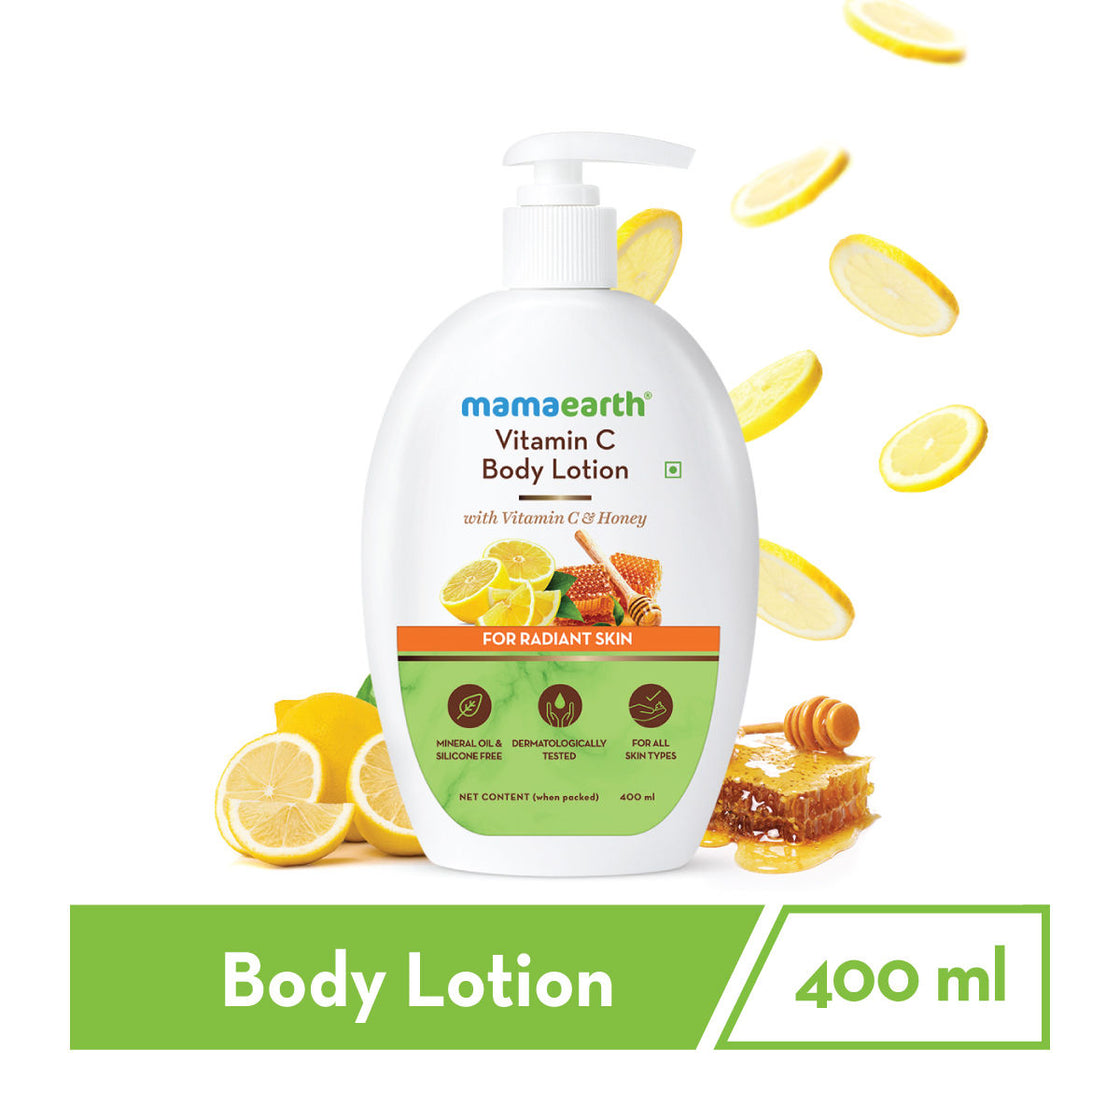 Mamaearth Vitamin C Body Lotion With Vitamin C & Honey For Radiant Skin-2